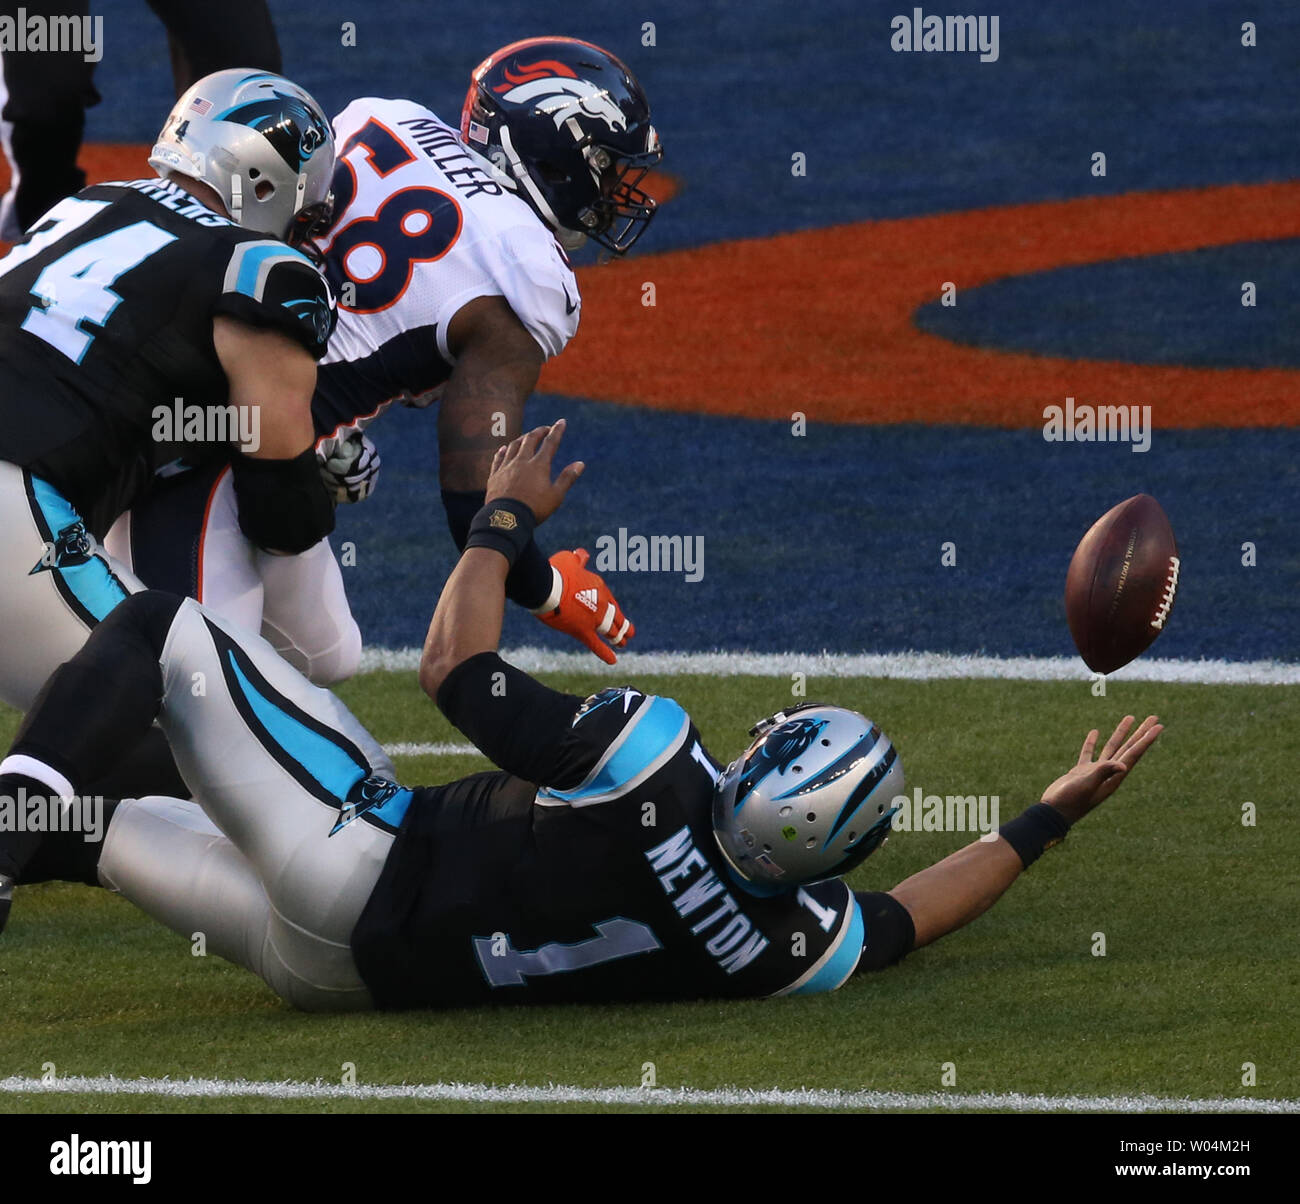 Carolina Panthers quarterback Cam Newton reaches fior his fumble forced by  Denver Broncos Von Miller that turned into a Broncos touchdown in the first  quarter of Super Bowl 50 in Santa Clara,